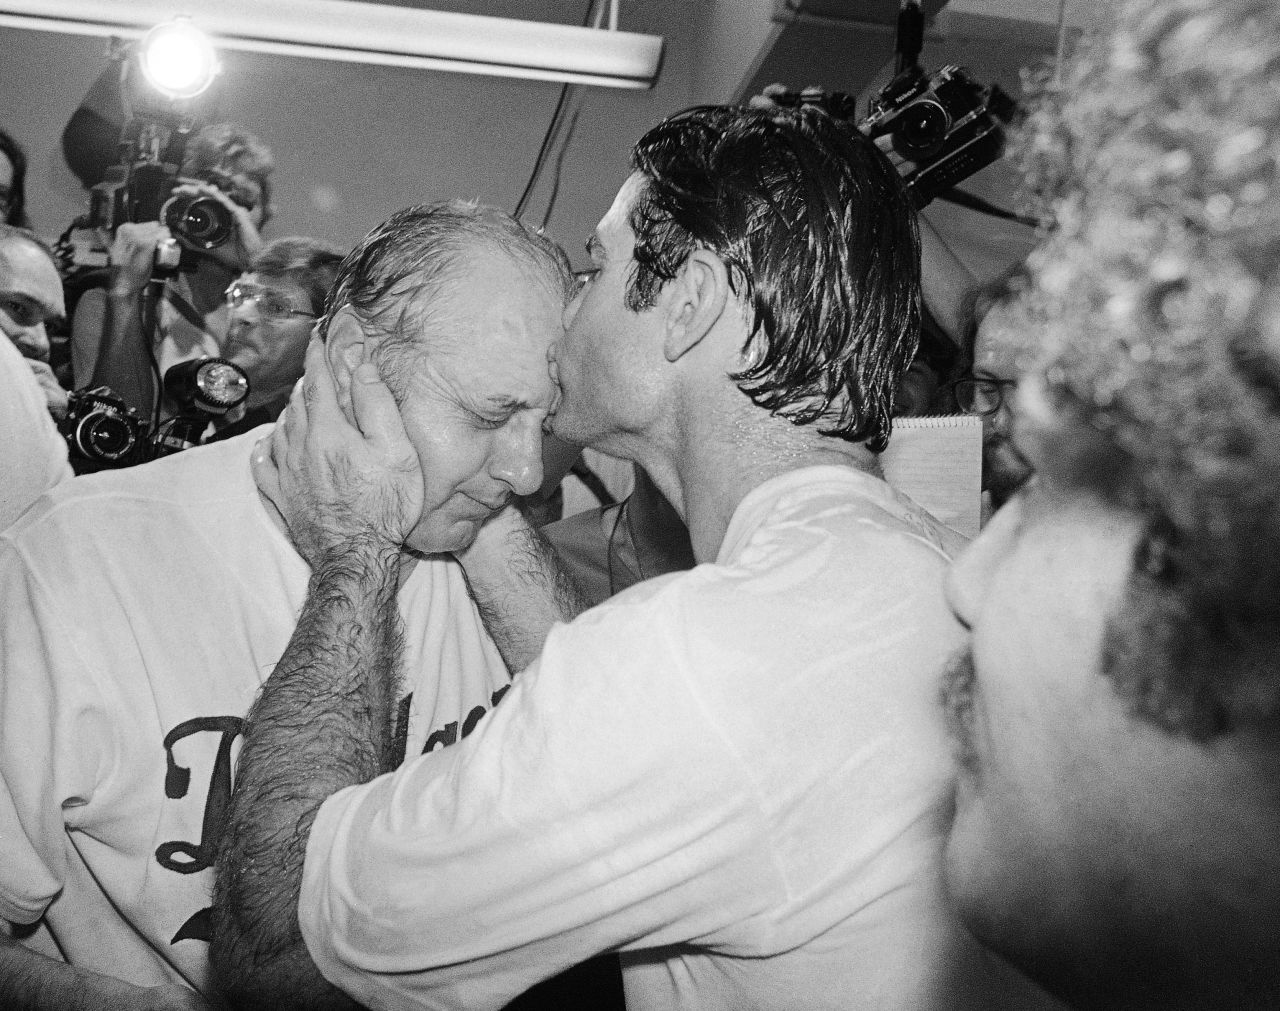 First baseman Steve Garvey kisses Lasorda in the Dodger Stadium locker room after the Dodgers beat the Philadelphia Phillies to win the National League pennant in October 1978.